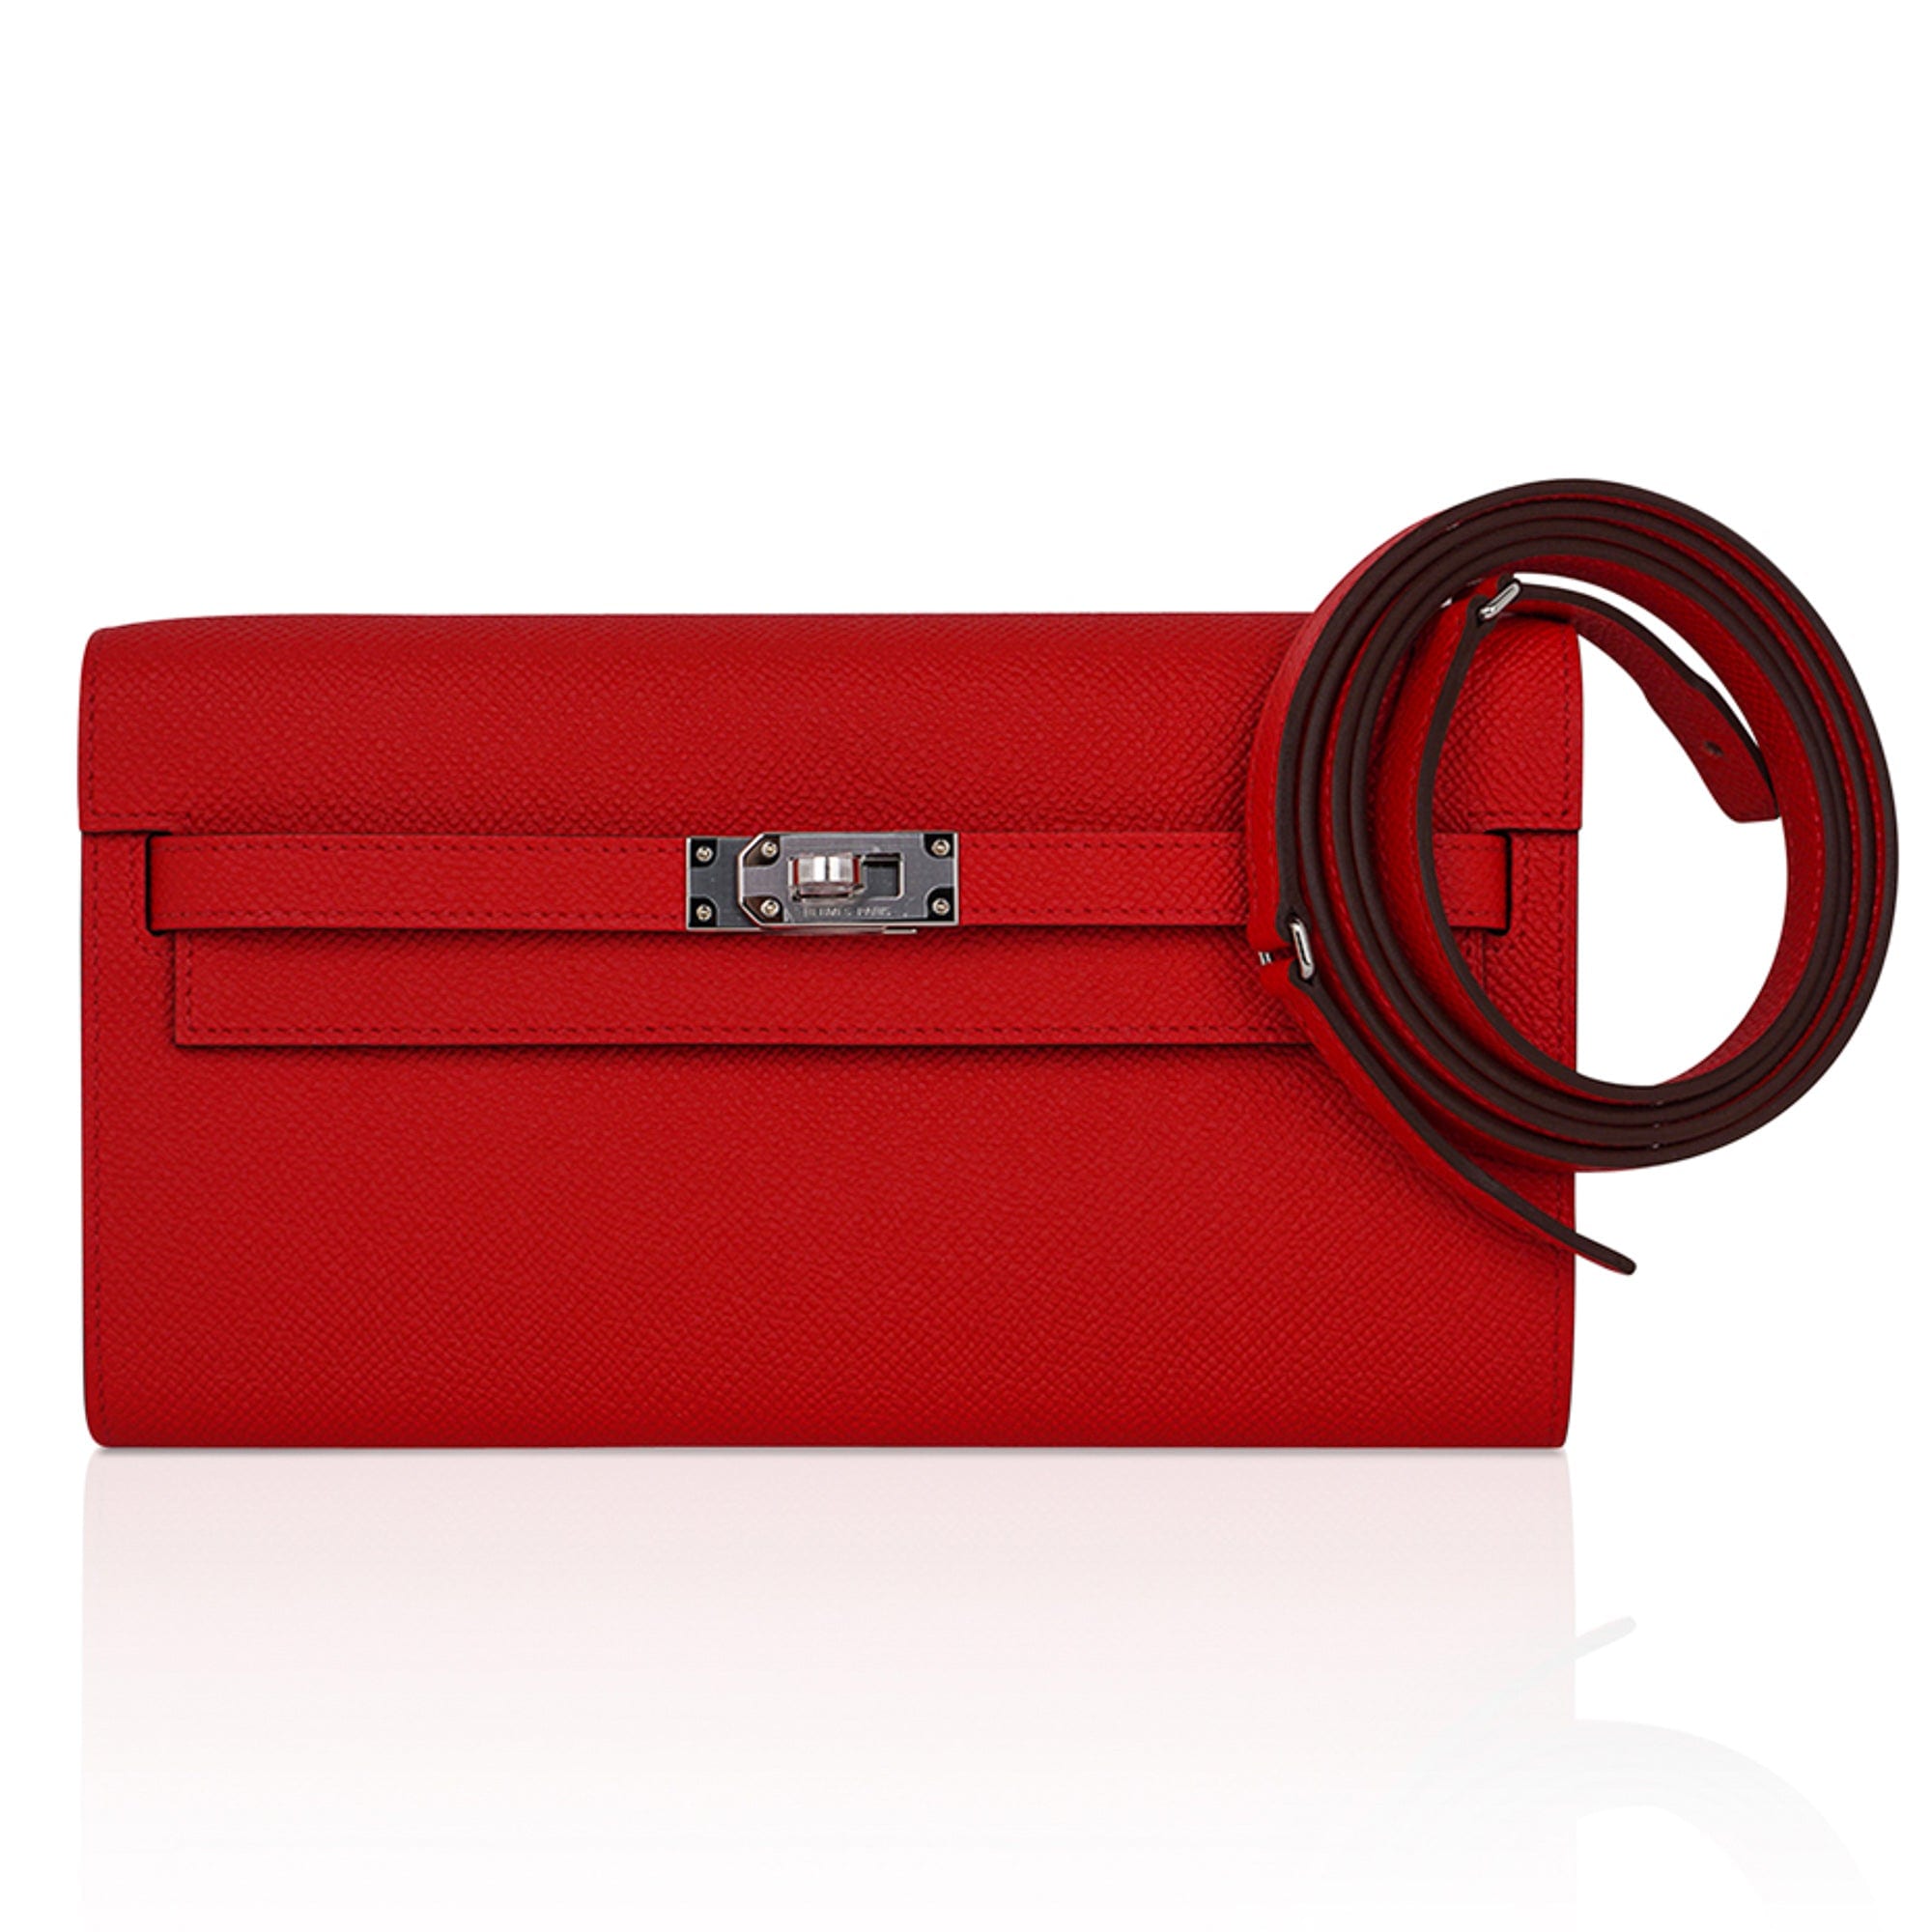 Hermes Kelly Classique Wallet for everyday use